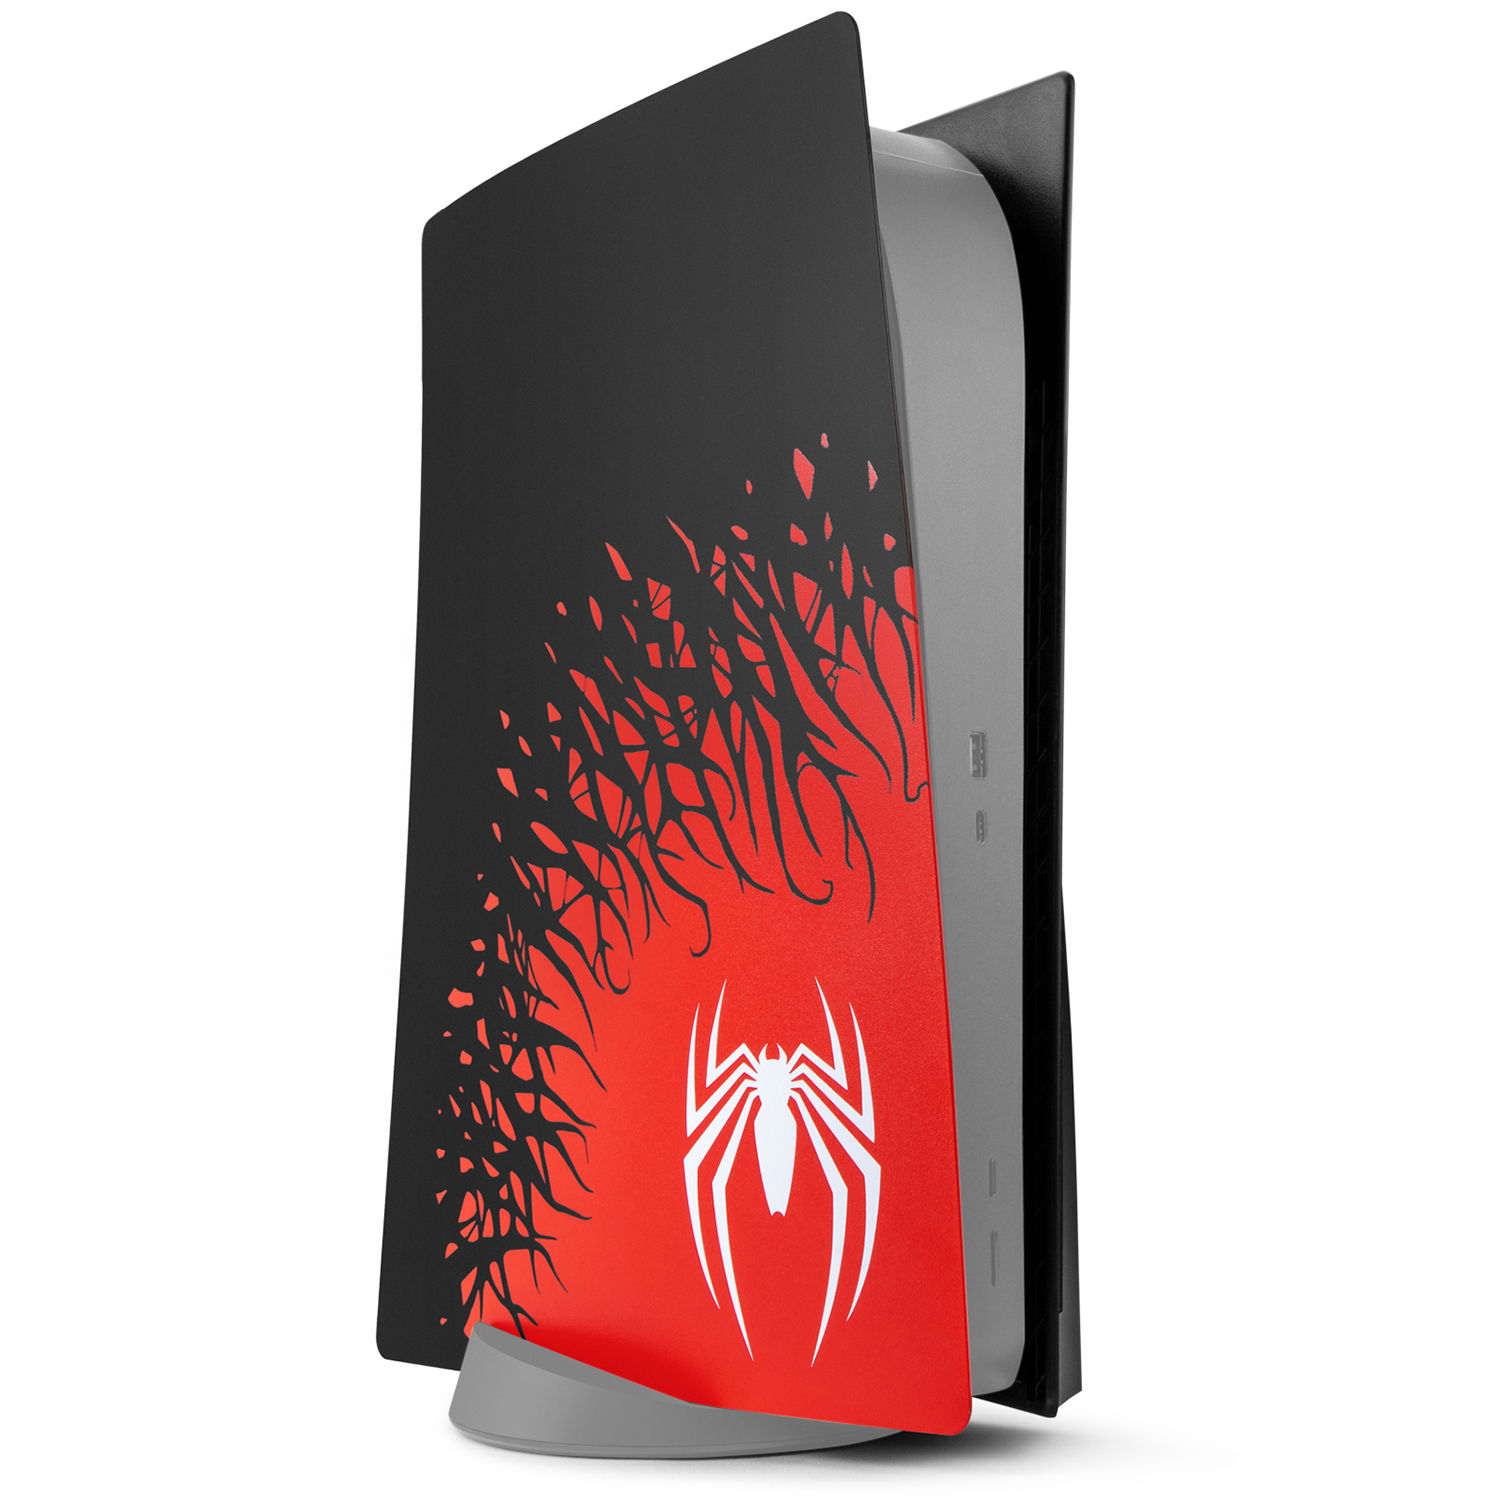 [Regular PS5 Disc Edition] - NOWSKINS Superhero Spider - Man 2 Limited Edition PS5 Cover Plates for PS5 Console, Premium ABS Faceplate Shell Covers for Playstation 5 Disc Edition